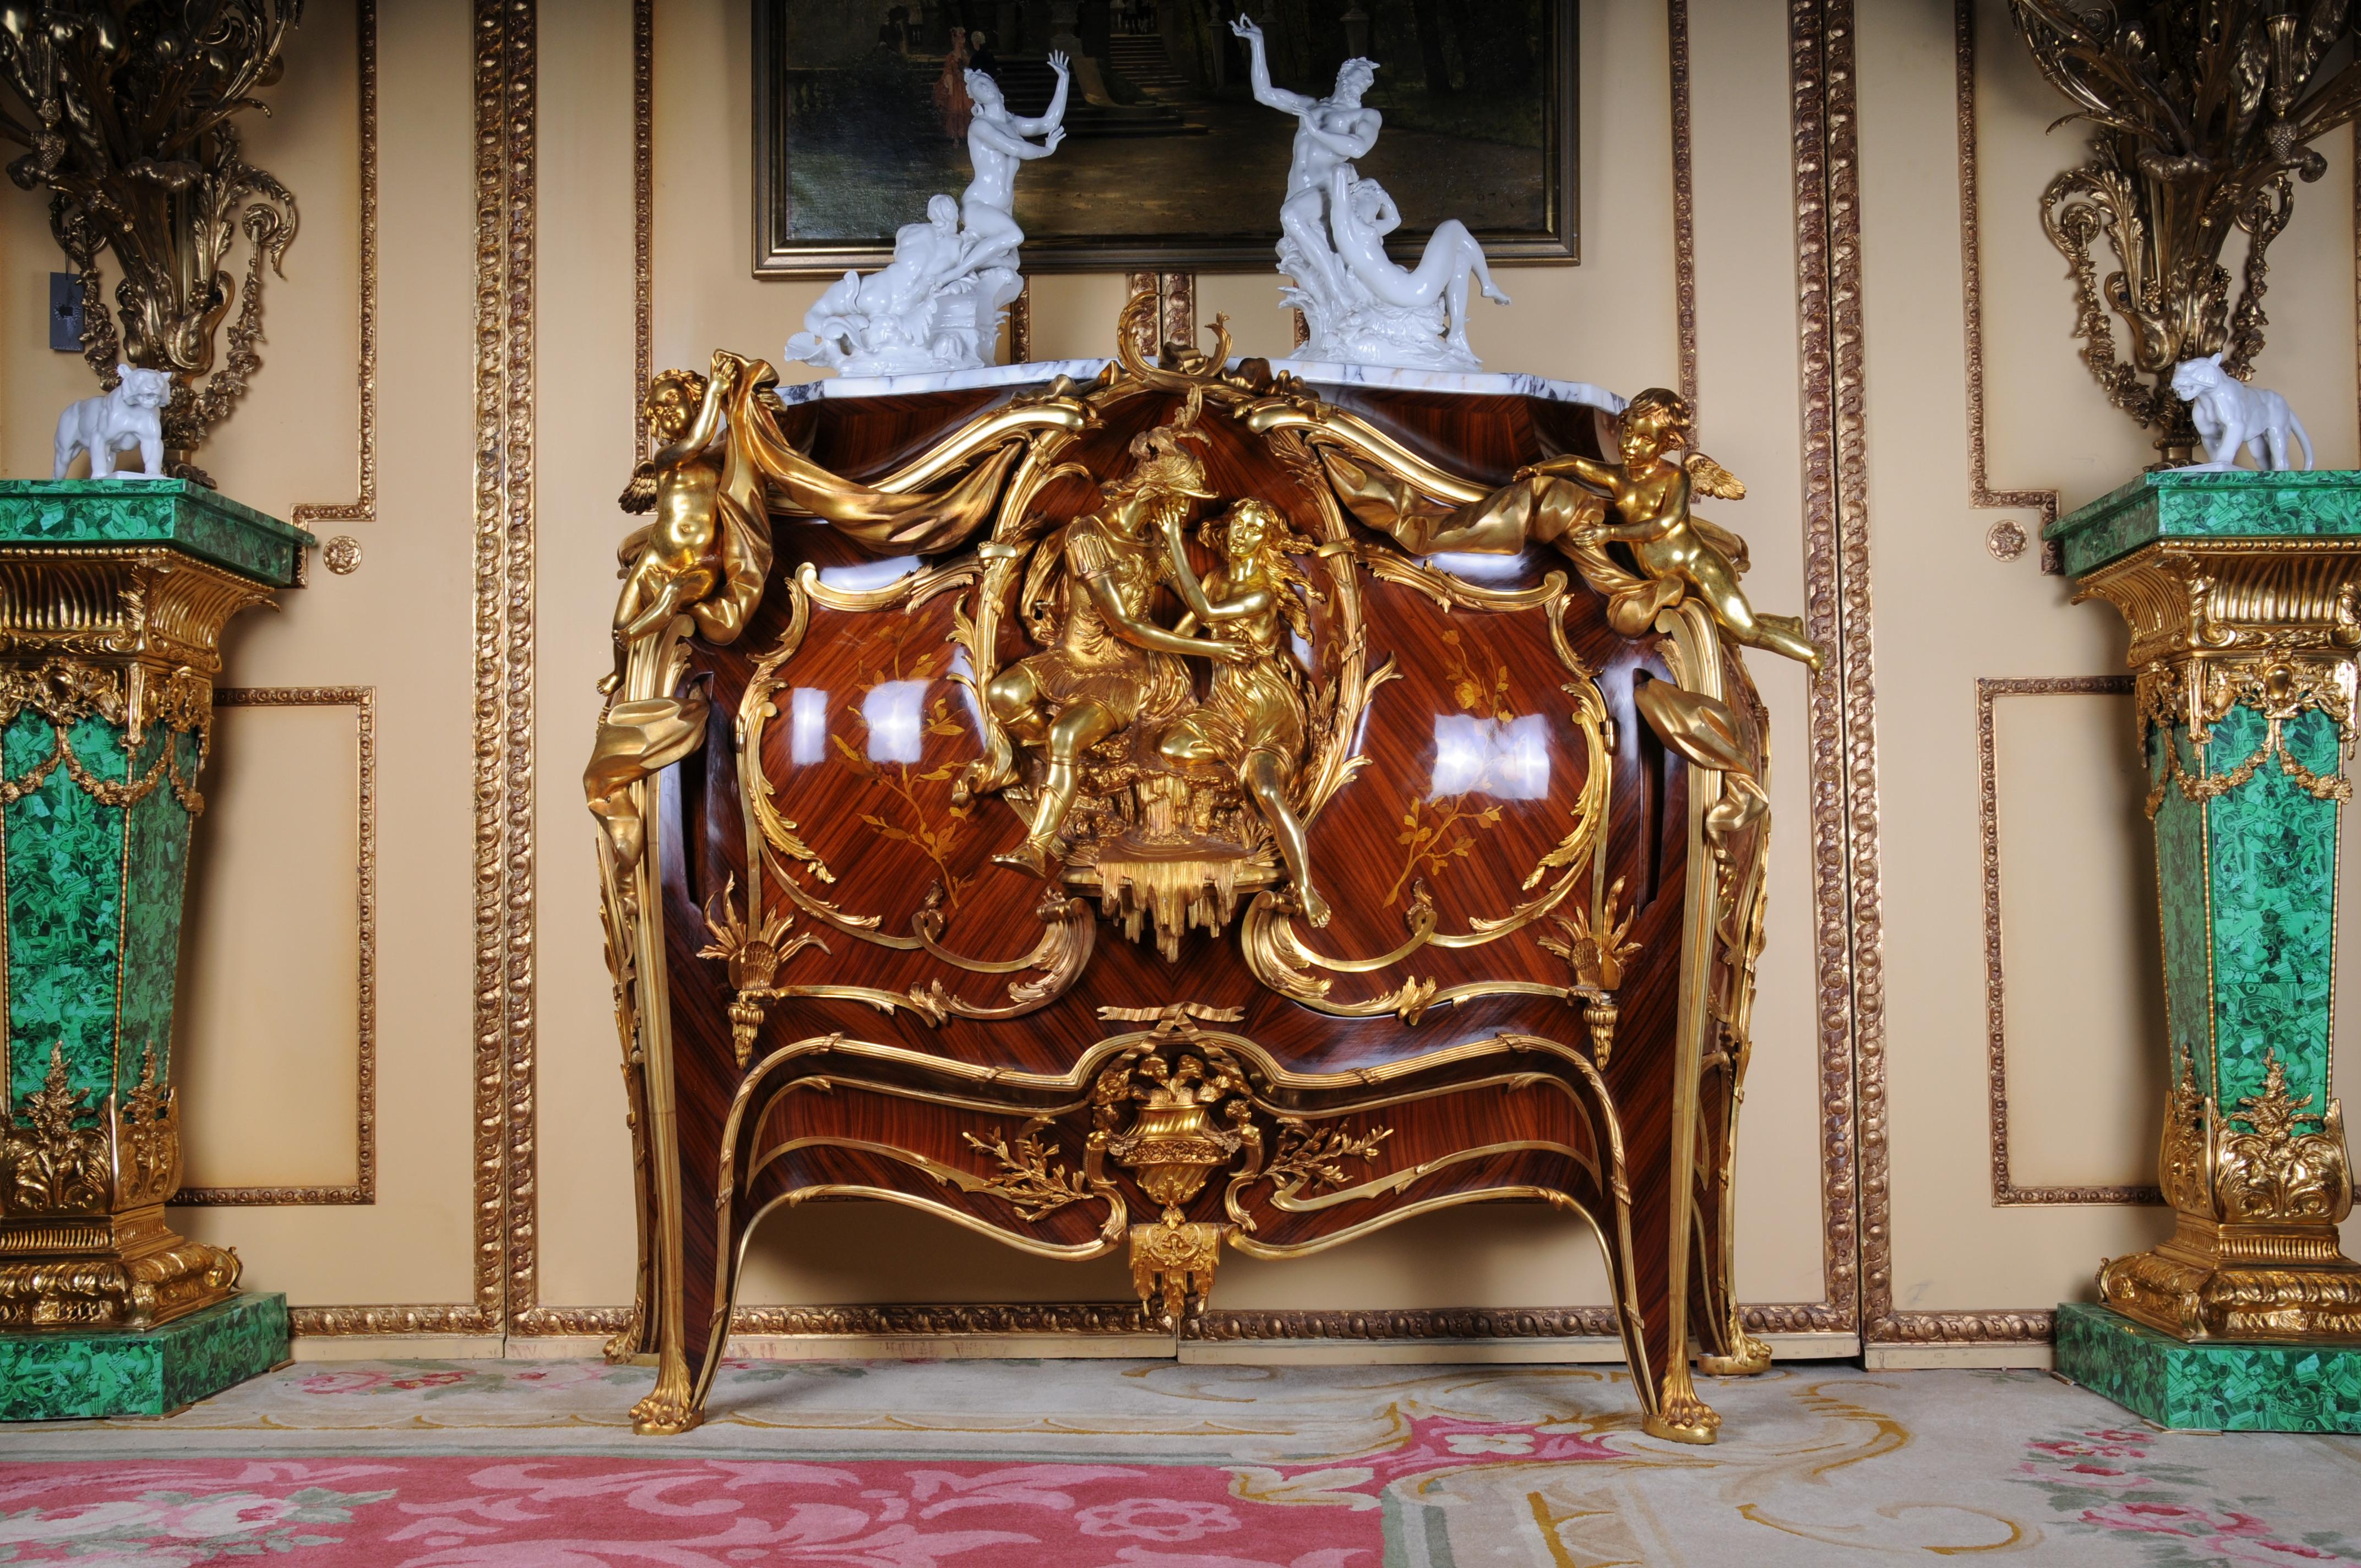 Majestic chest of drawers designed by Francois Linke & Leon Massagé, Paris

Royal chest of drawers based on a design by Francois Linke.
Rich gilded bronze applications in three-dimensional decorations and figures.

Material: oak, rosewood, kingwood,